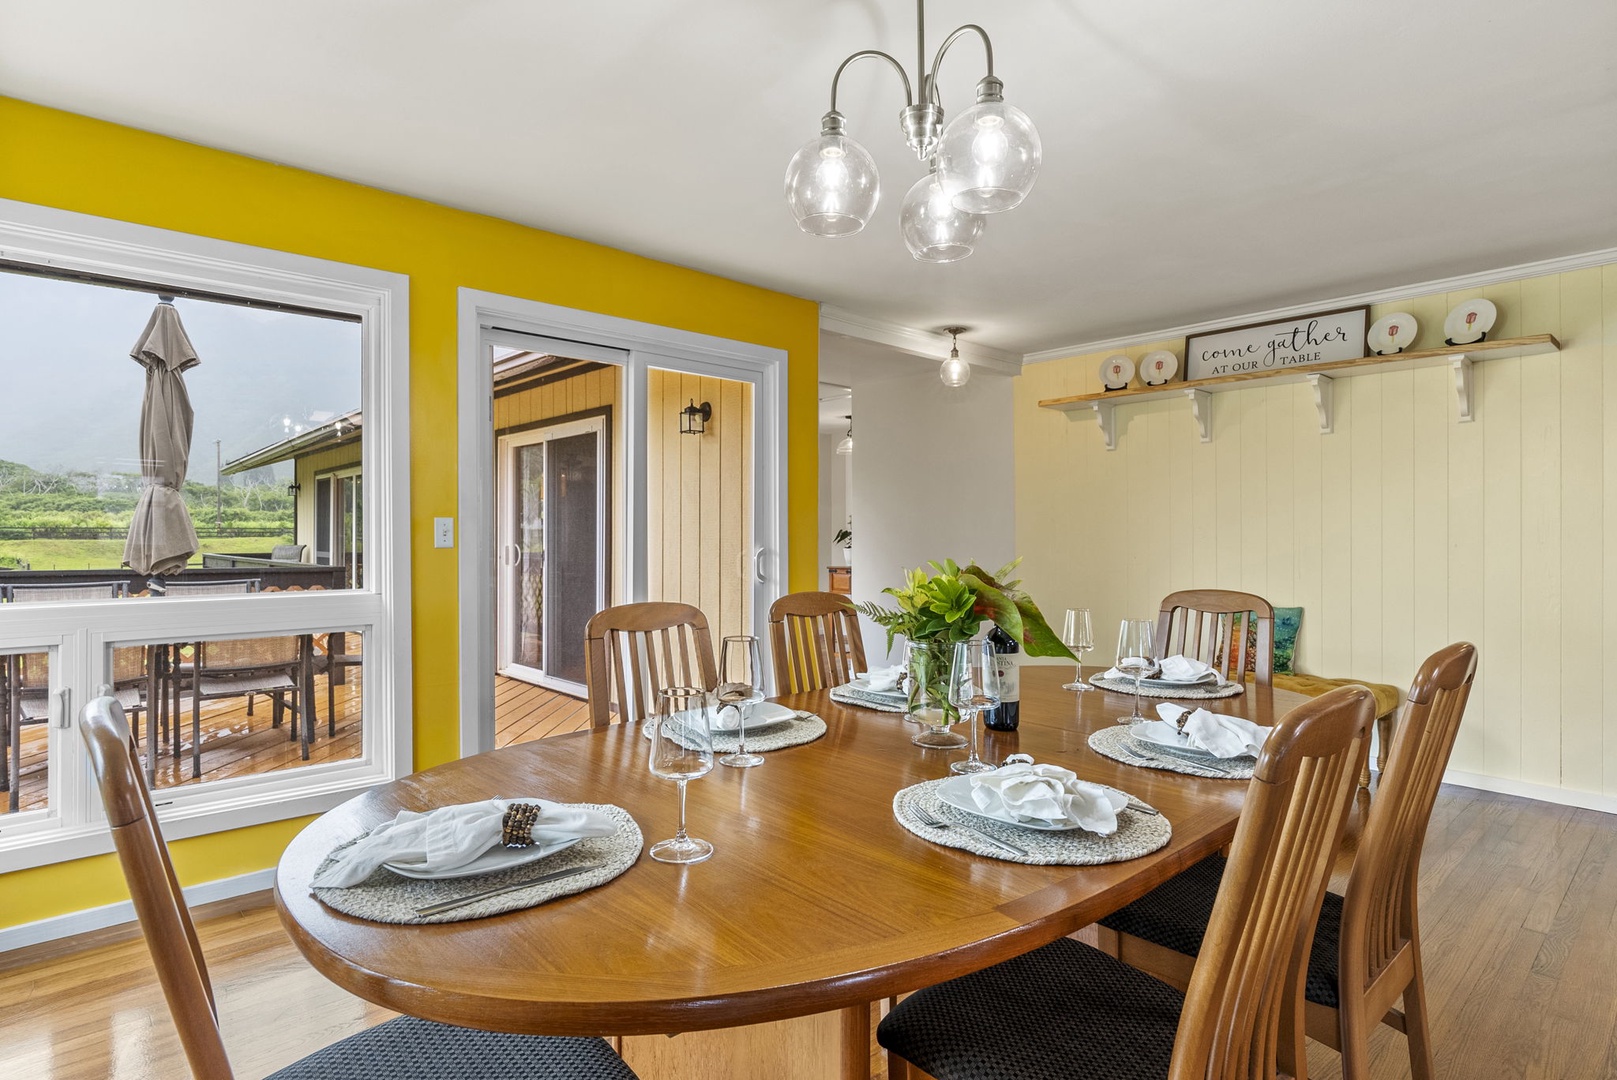 Hauula Vacation Rentals, Mau Loa Hale - Dining area opens to deck